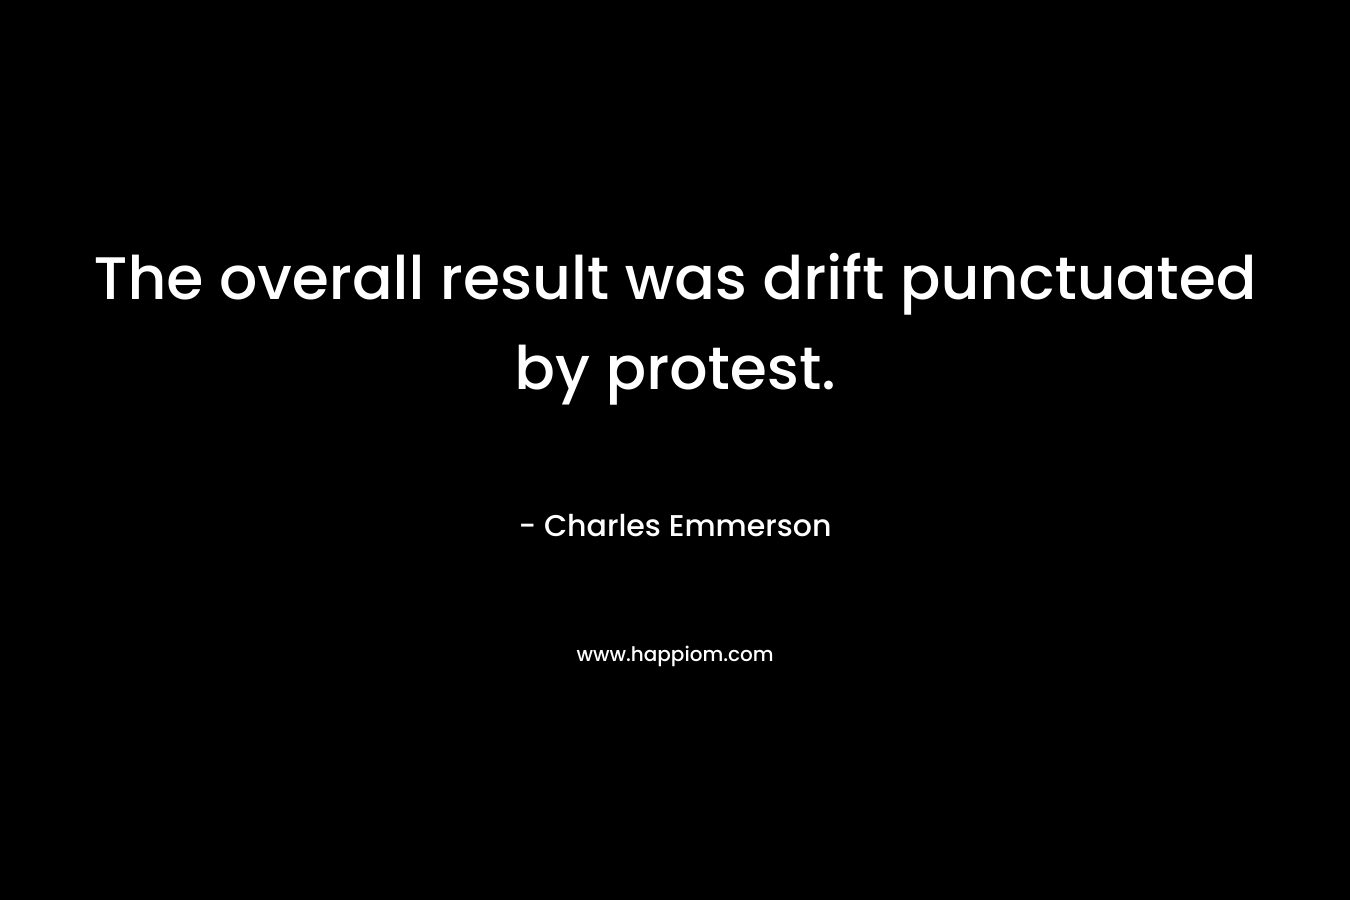 The overall result was drift punctuated by protest.